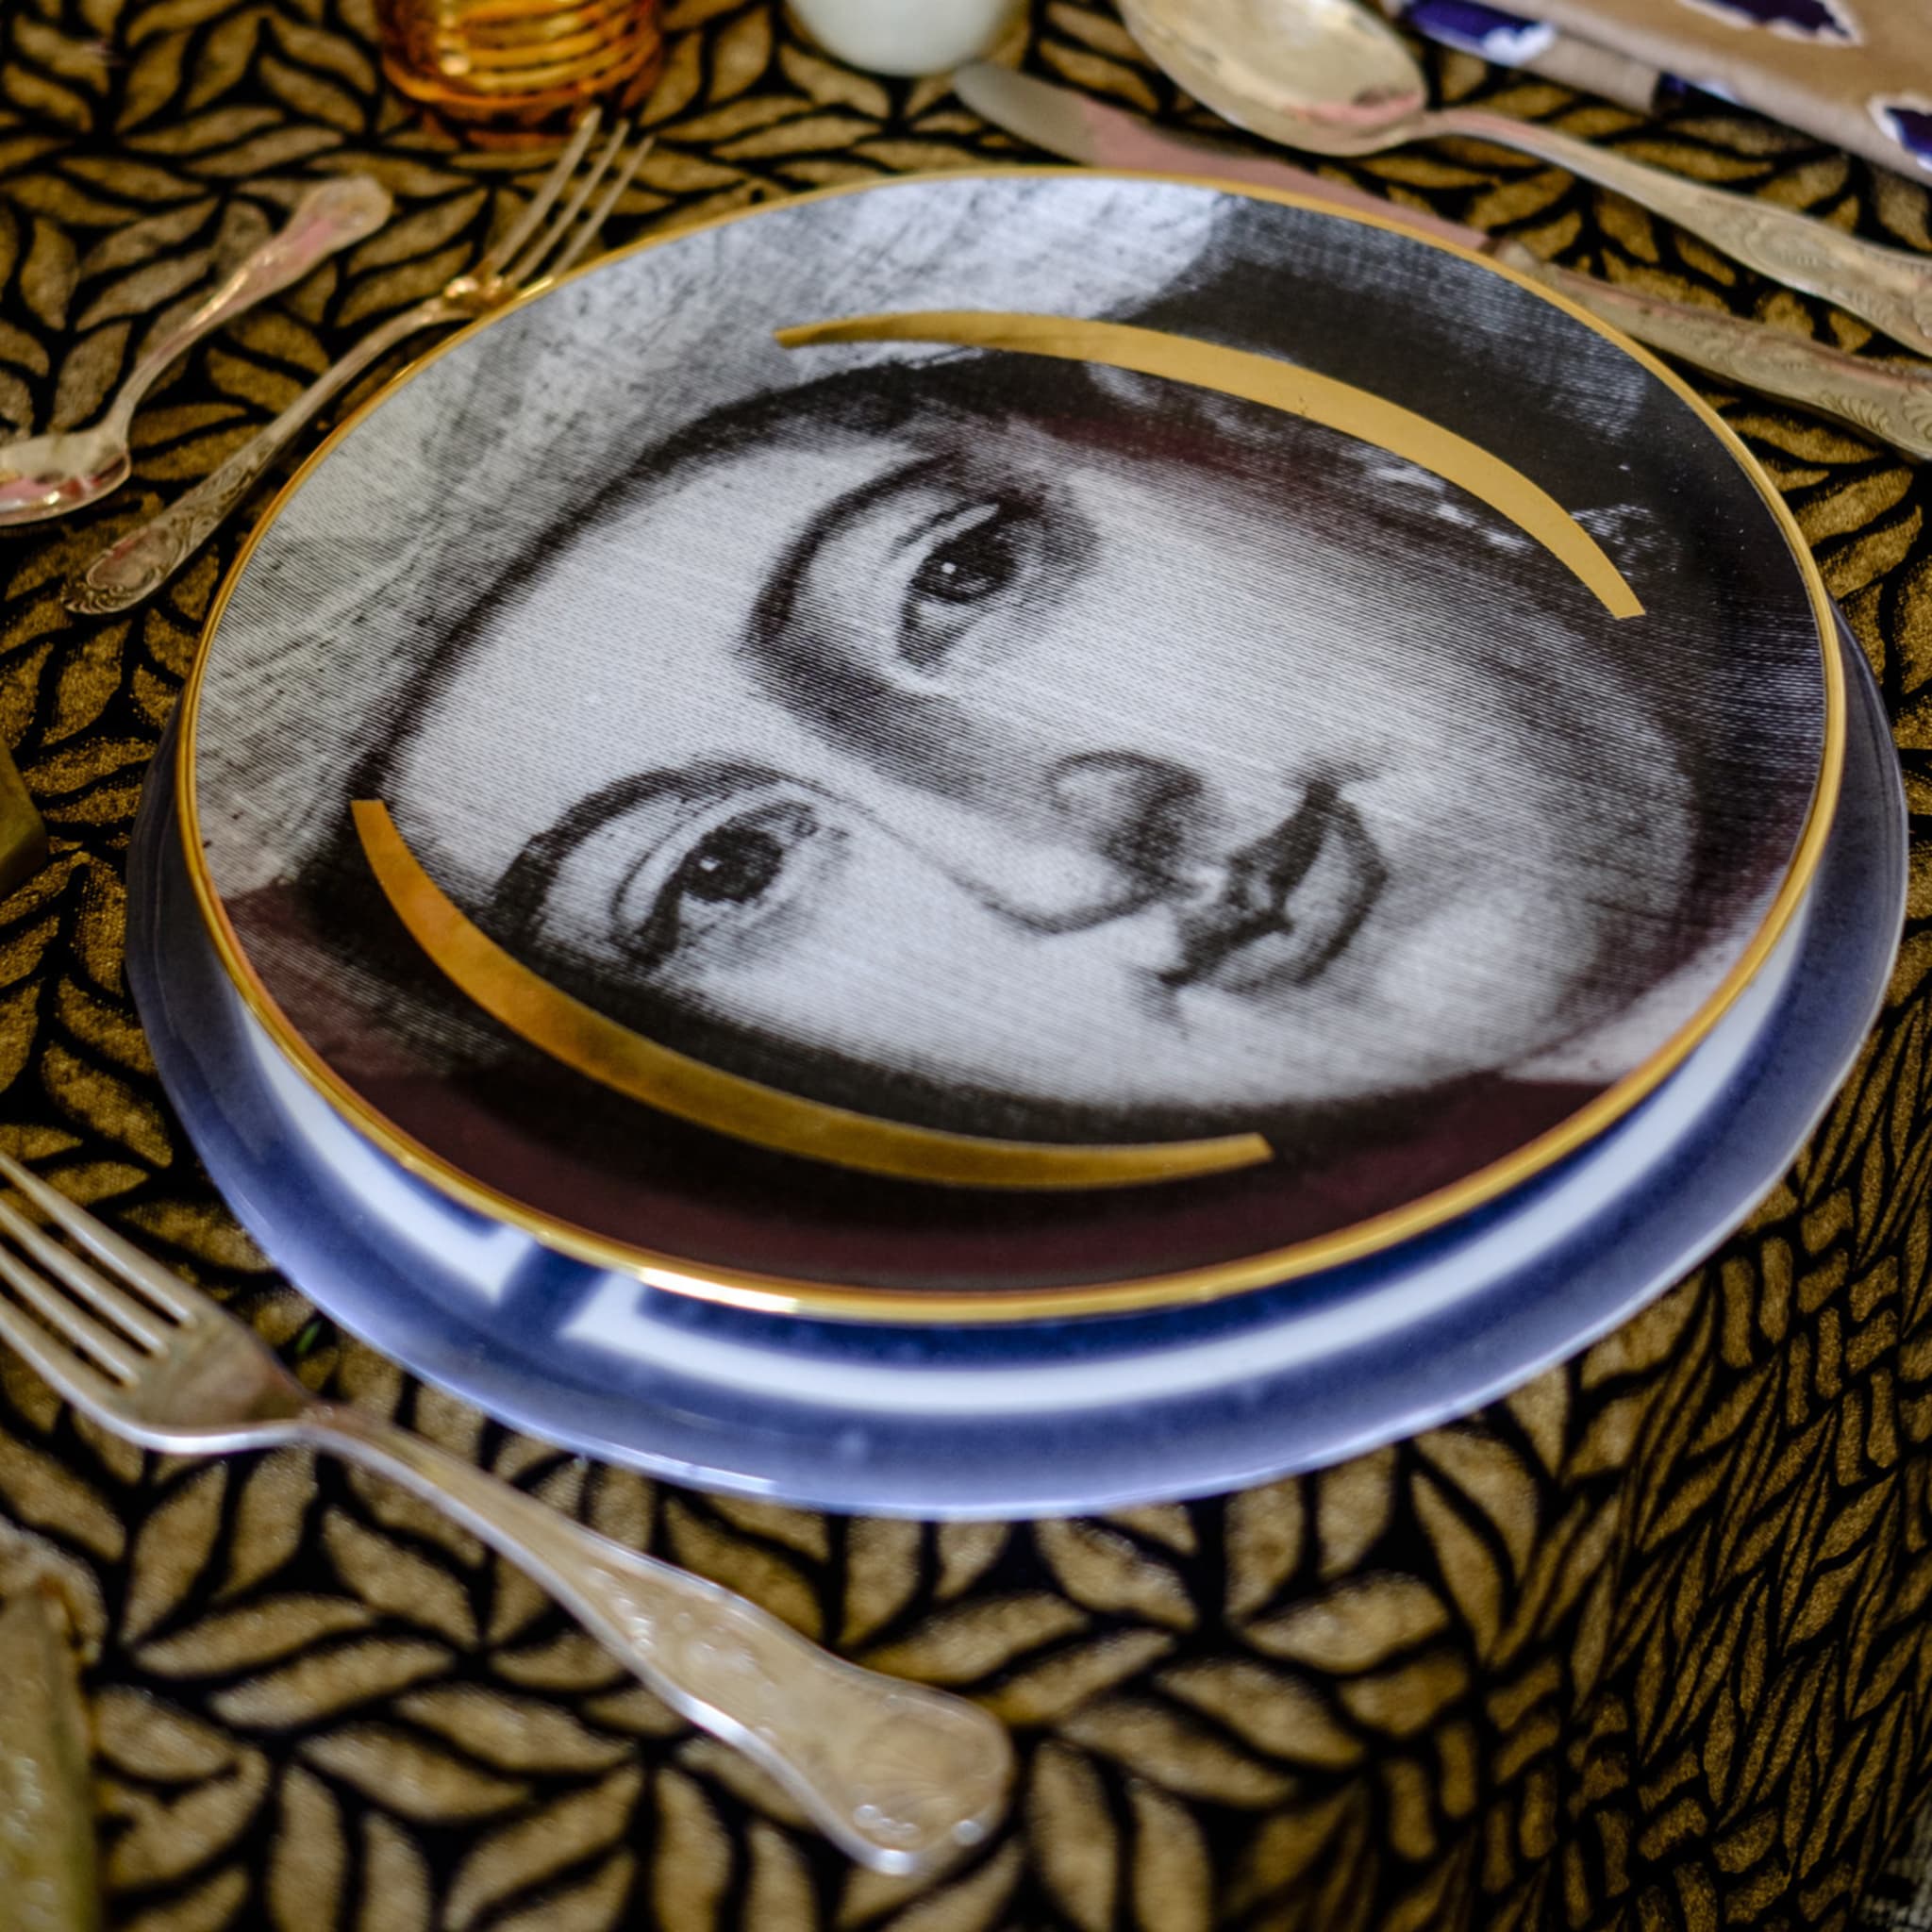 The Sultan Limited Gold Edition Dinner Plate N.4 - Alternative view 1